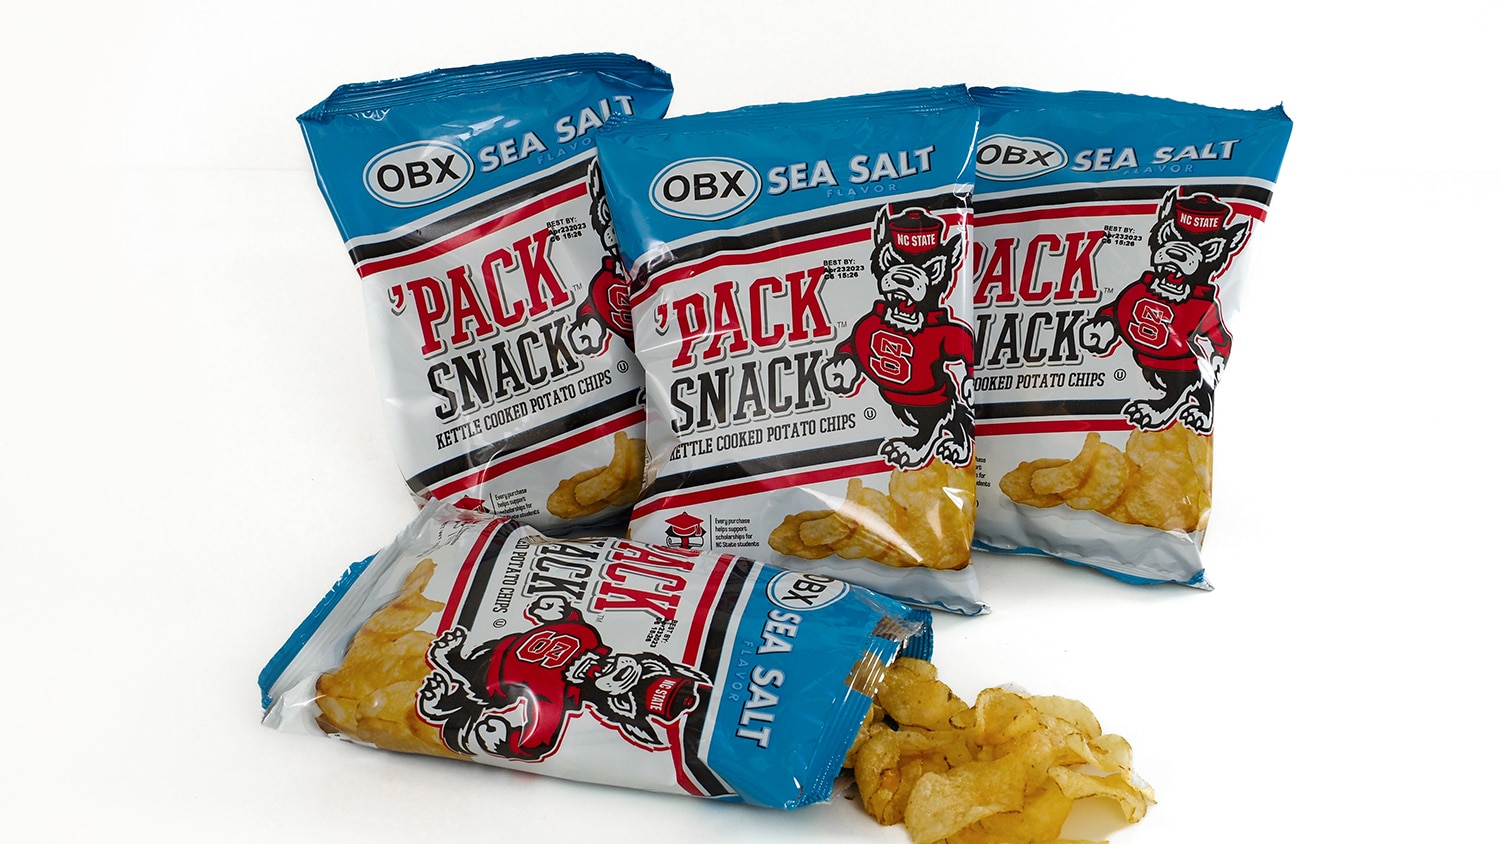 Four bags of 'Pack Snack potato chips, featuring the NC State branding.